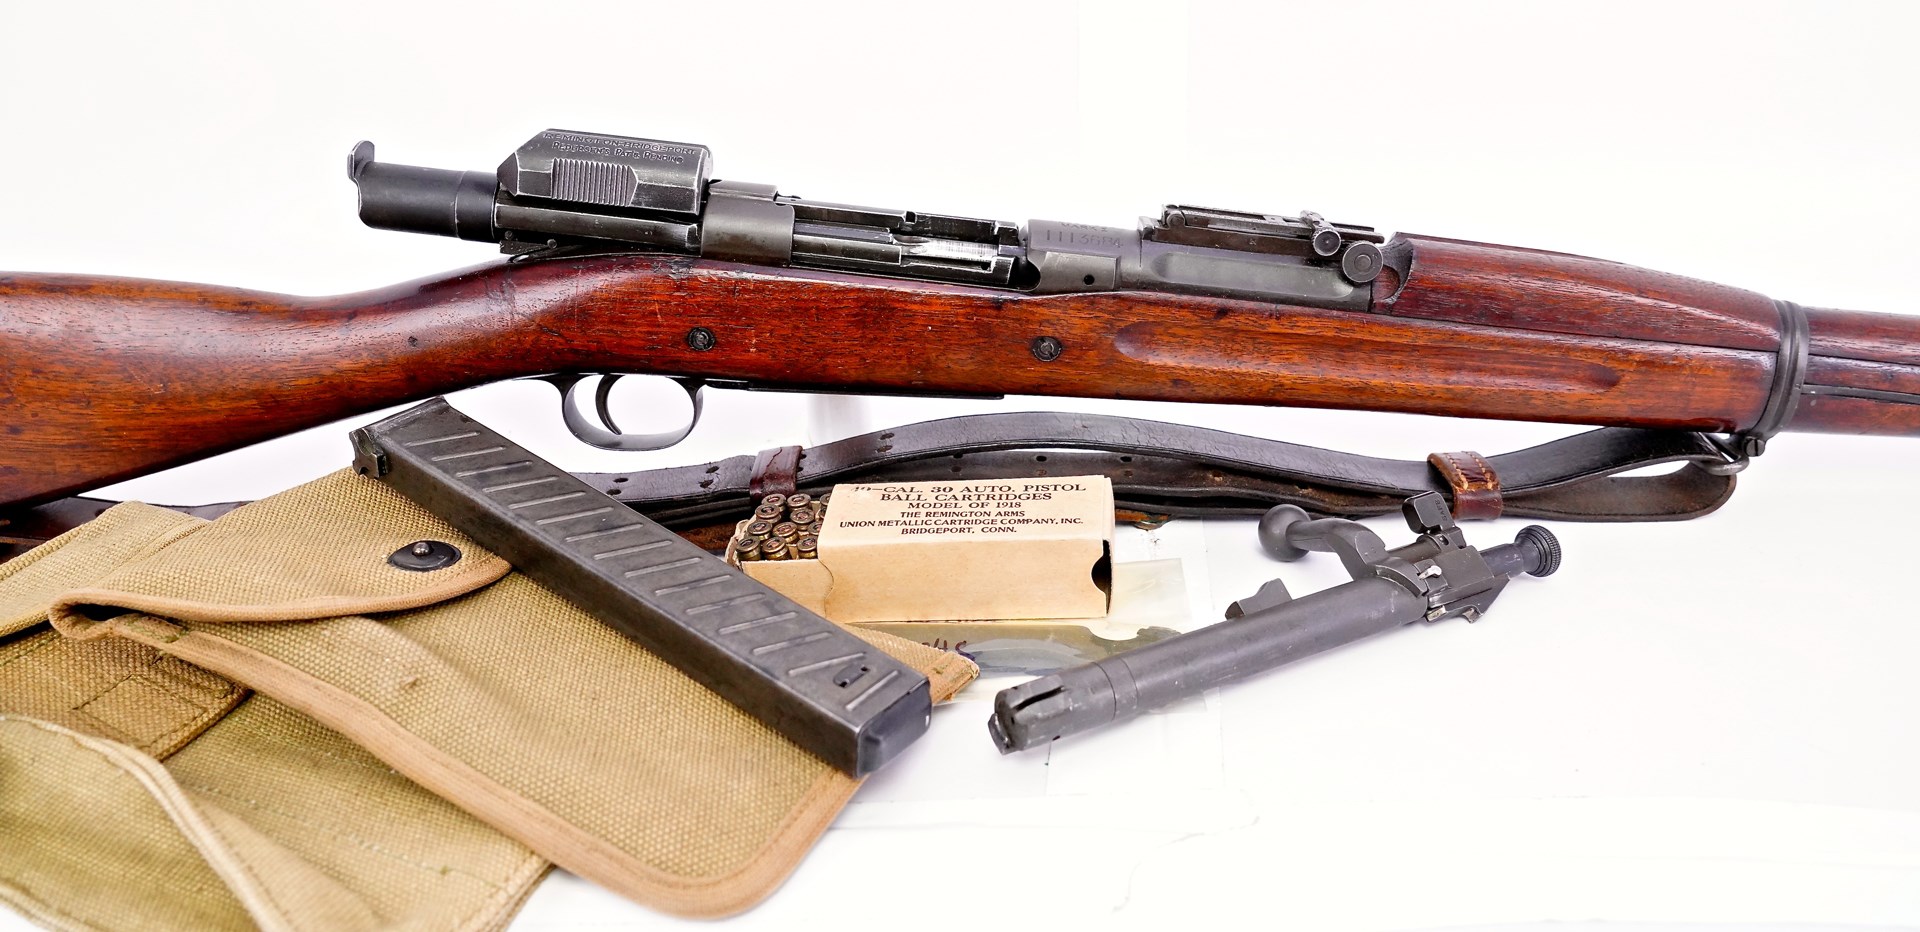 Springfield 1903 Mark I rifle with rare Pedersen Device, magazine and accessories from 1919